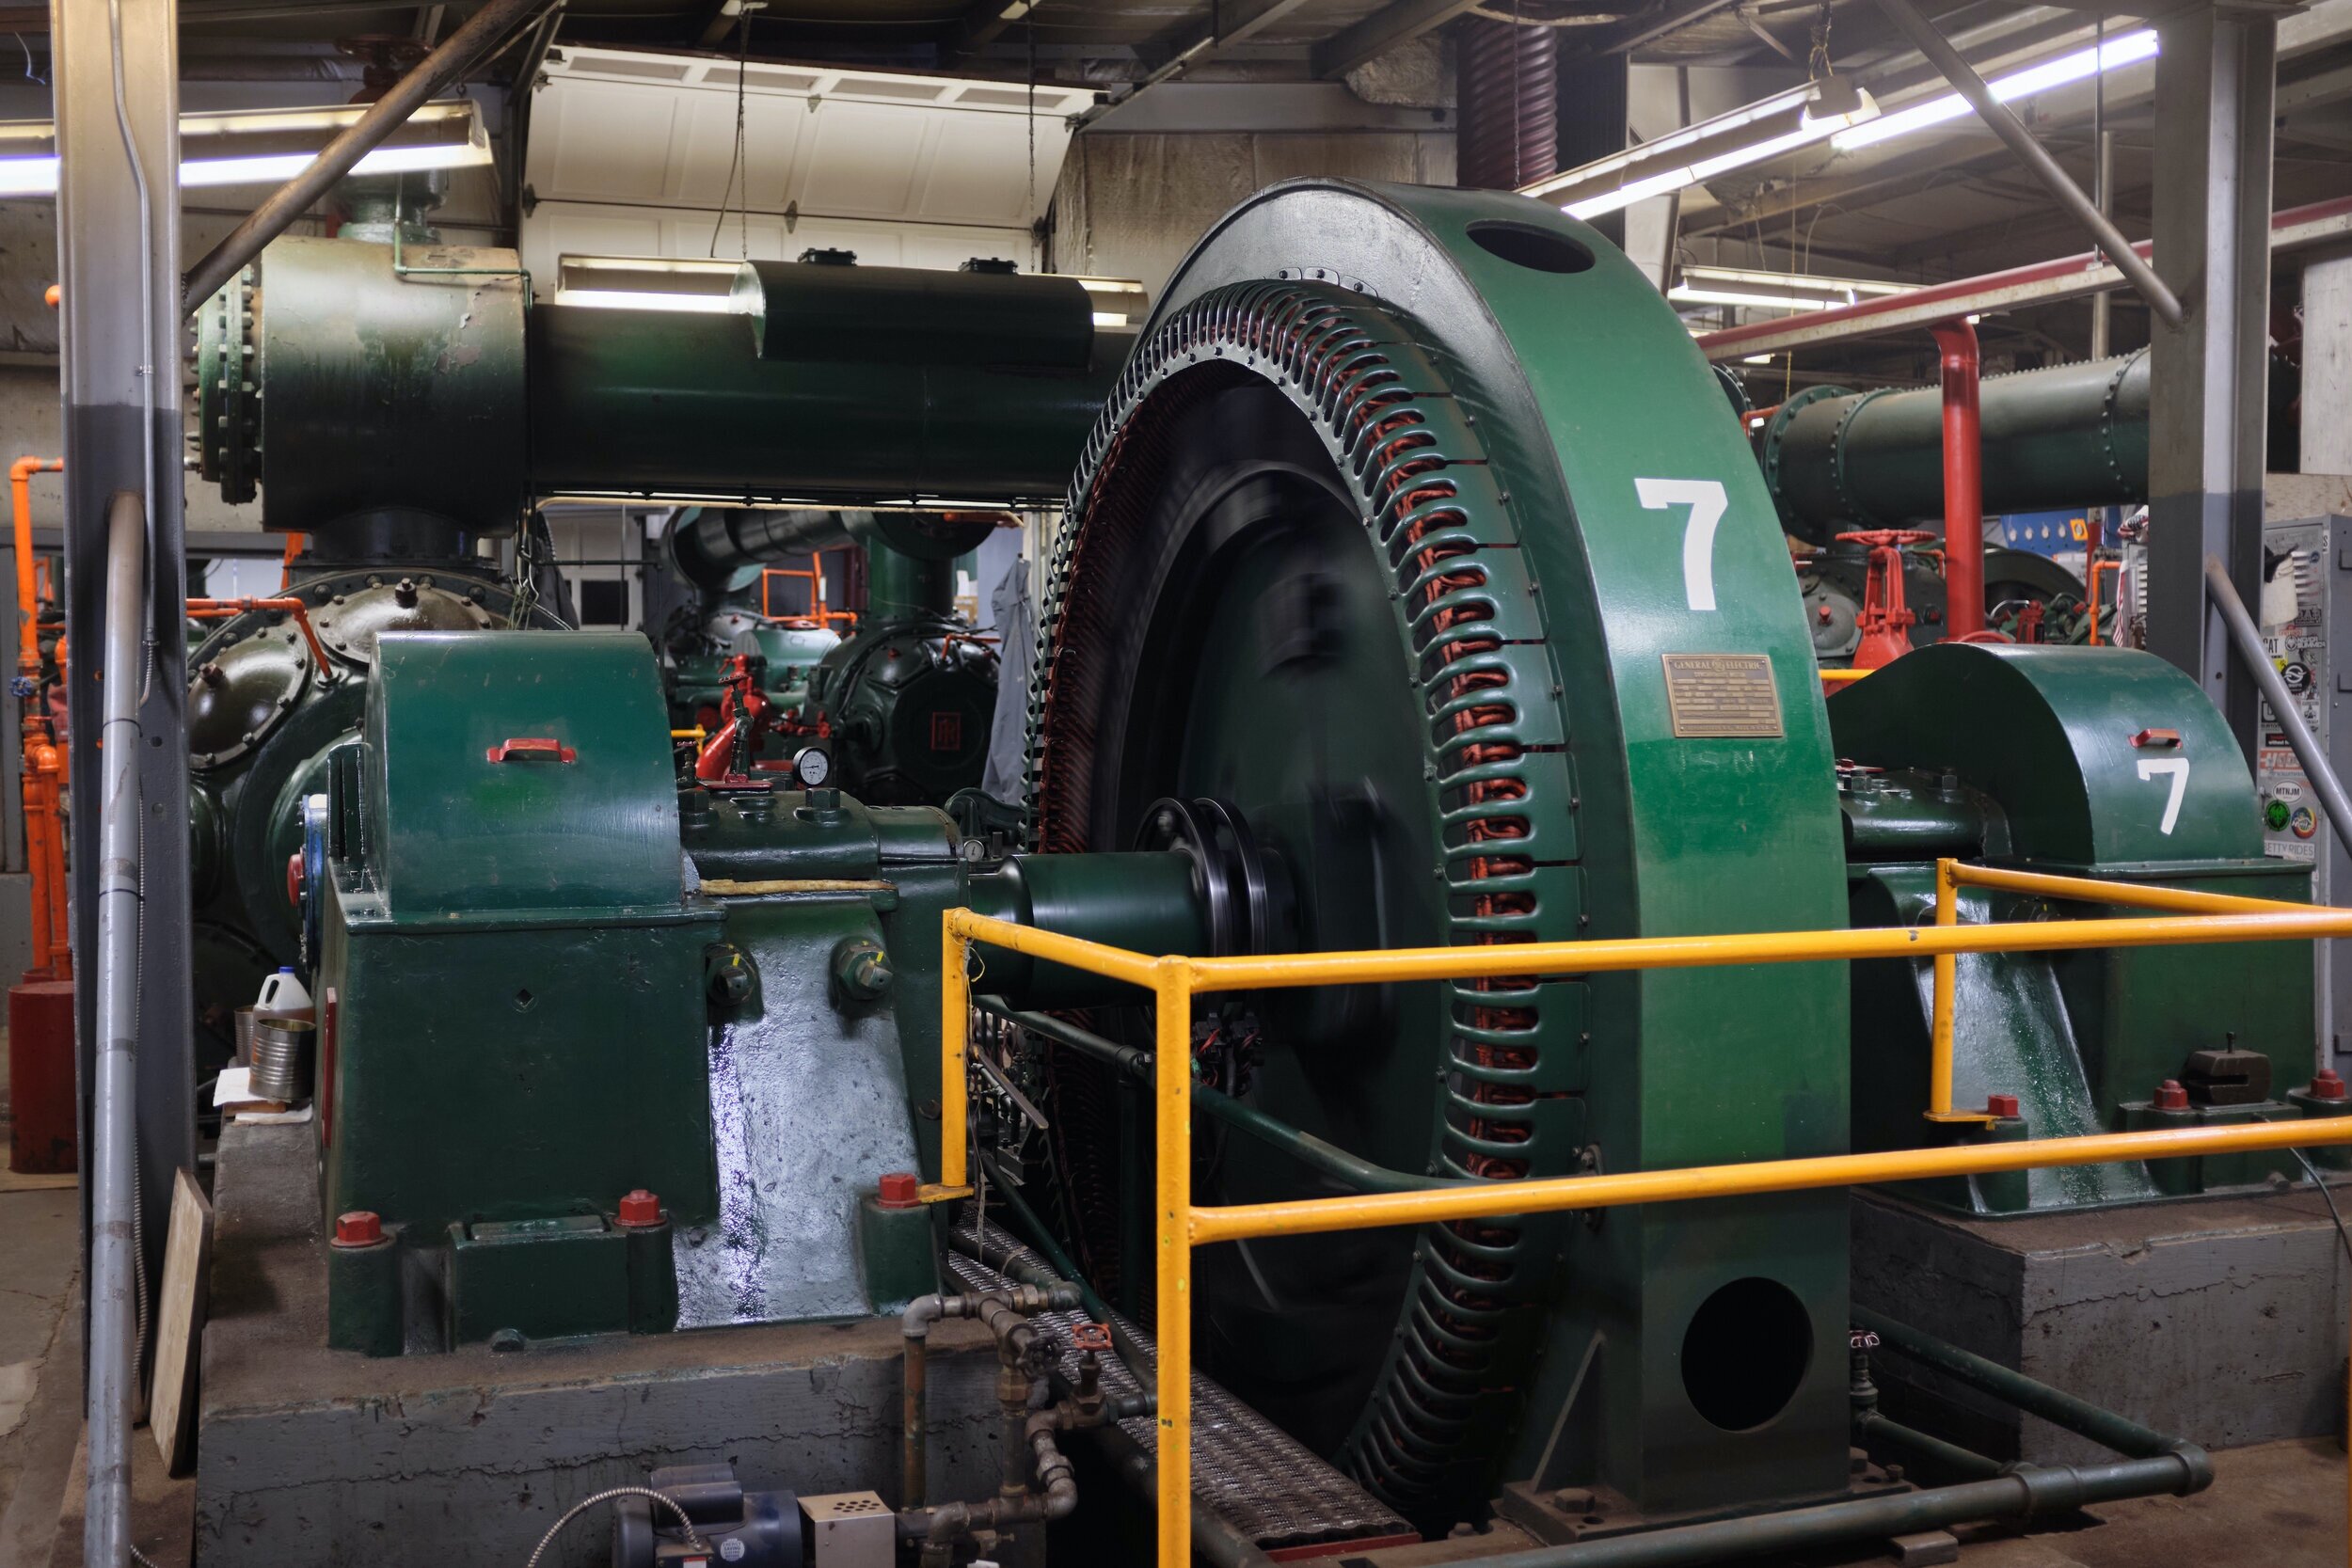  Compressor 7, formerly property of the United States Government, ran air tools at a shipyard in New Jersey during World War Two. 